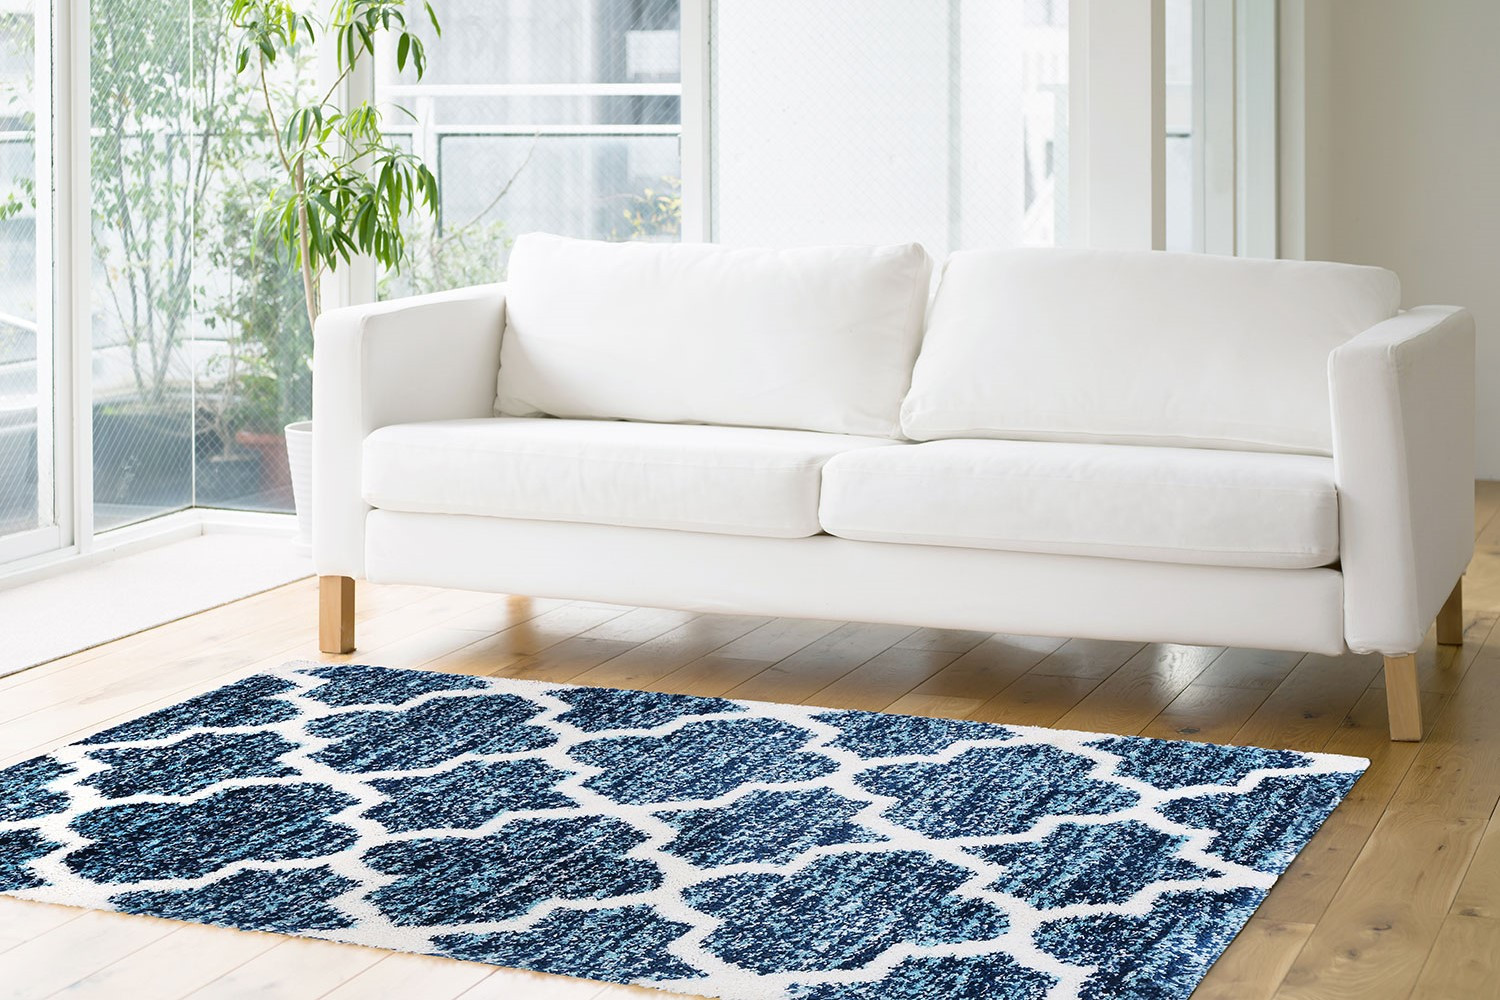 Rugs For Living Room Ideas
 Small Living Room Ideas on a Bud